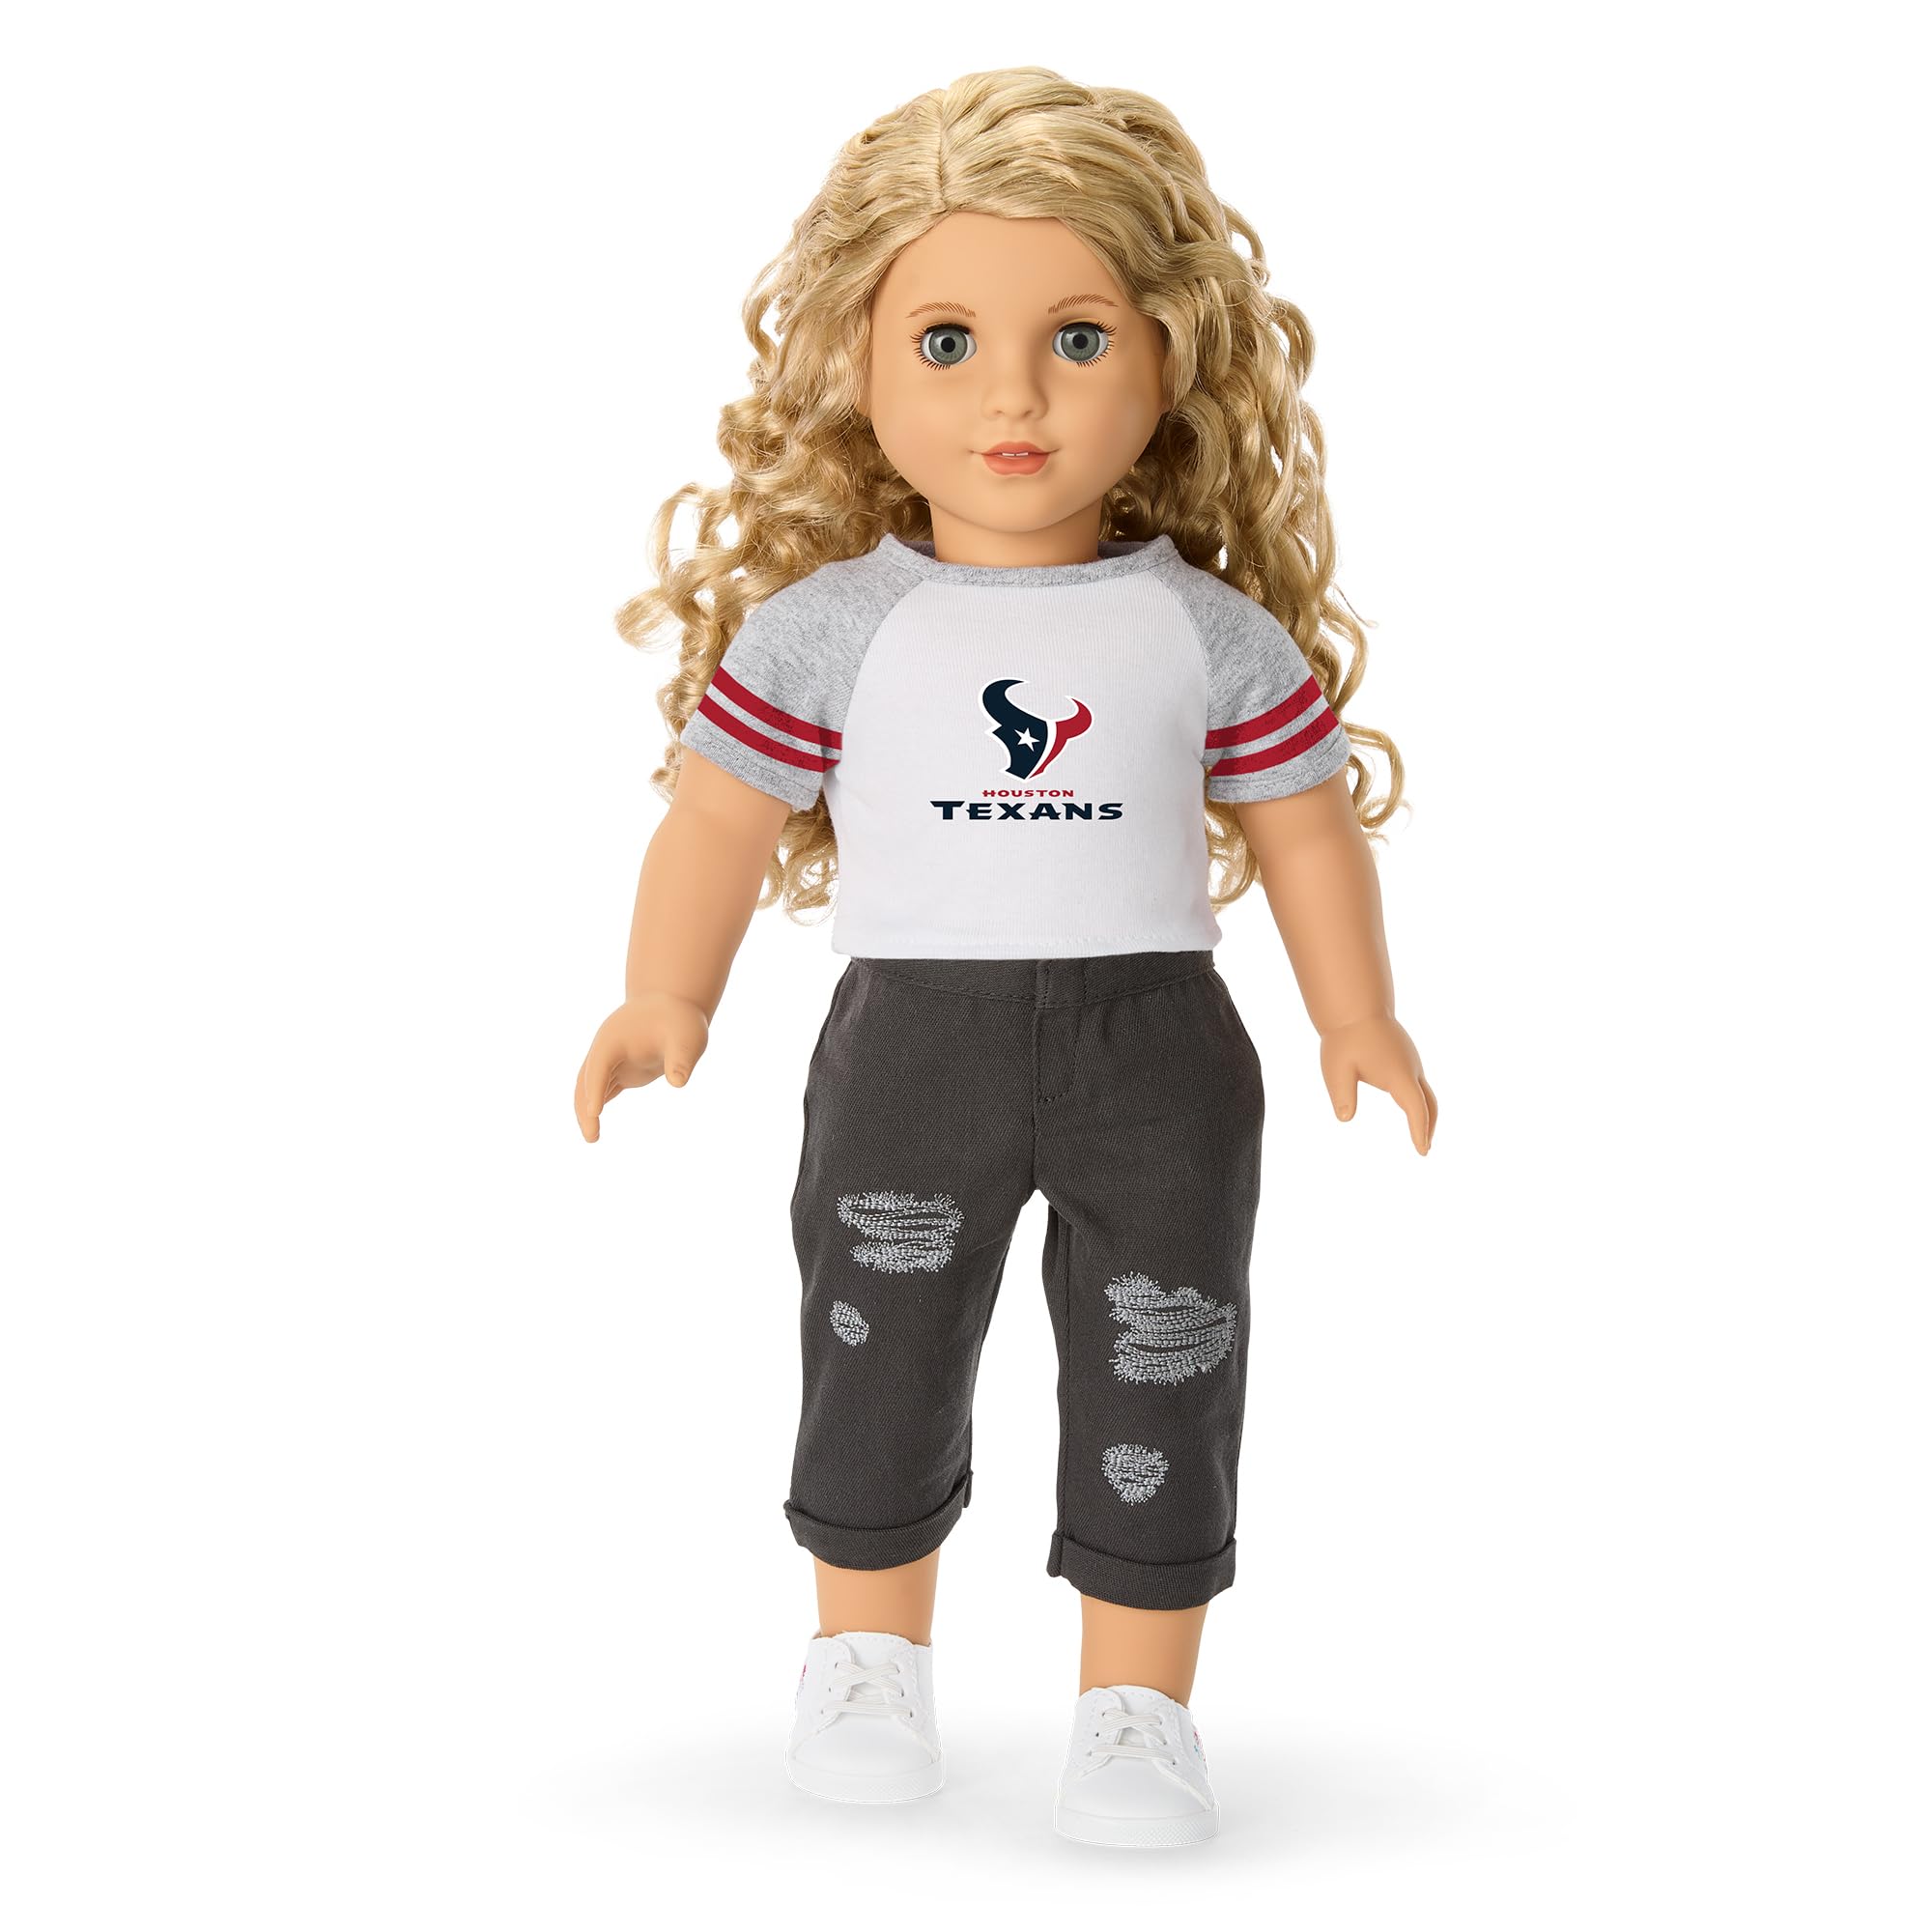 American Girl Houston Texans 18 inch Fan Tee with Crew Neck Striped Short Sleeve, Red and Navy, 1 pcs, Ages 6+